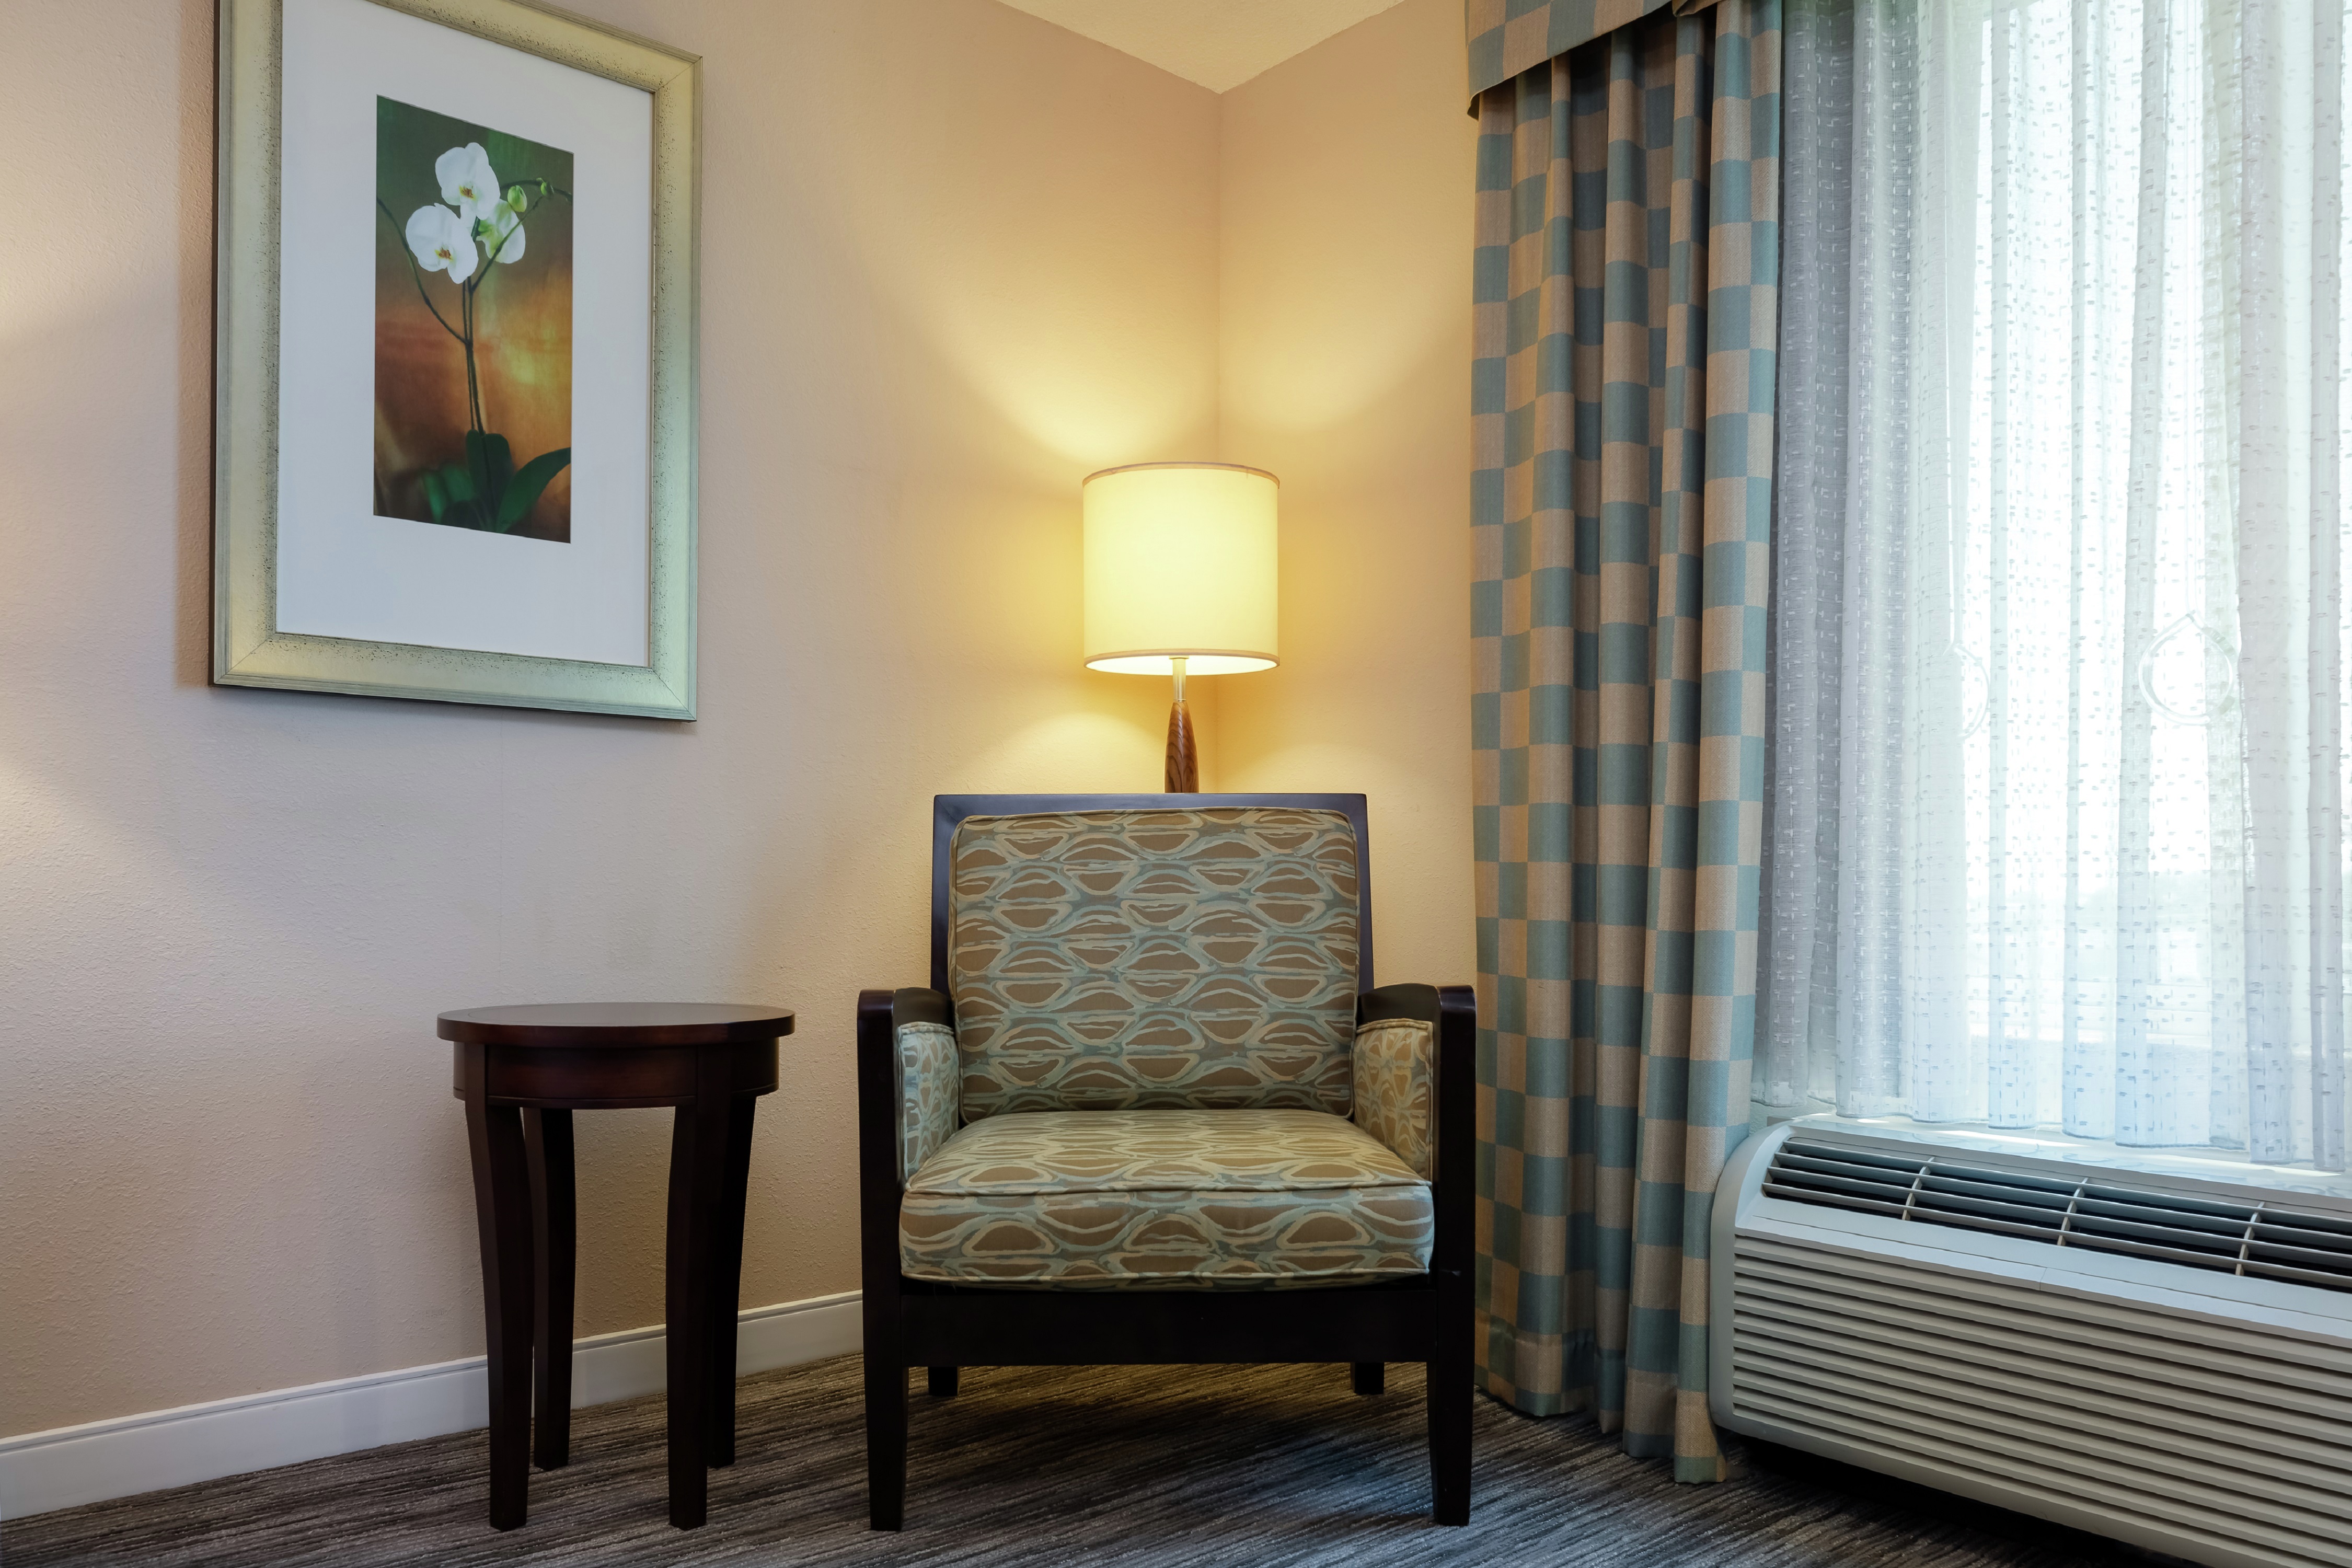 King Guestroom With Chair